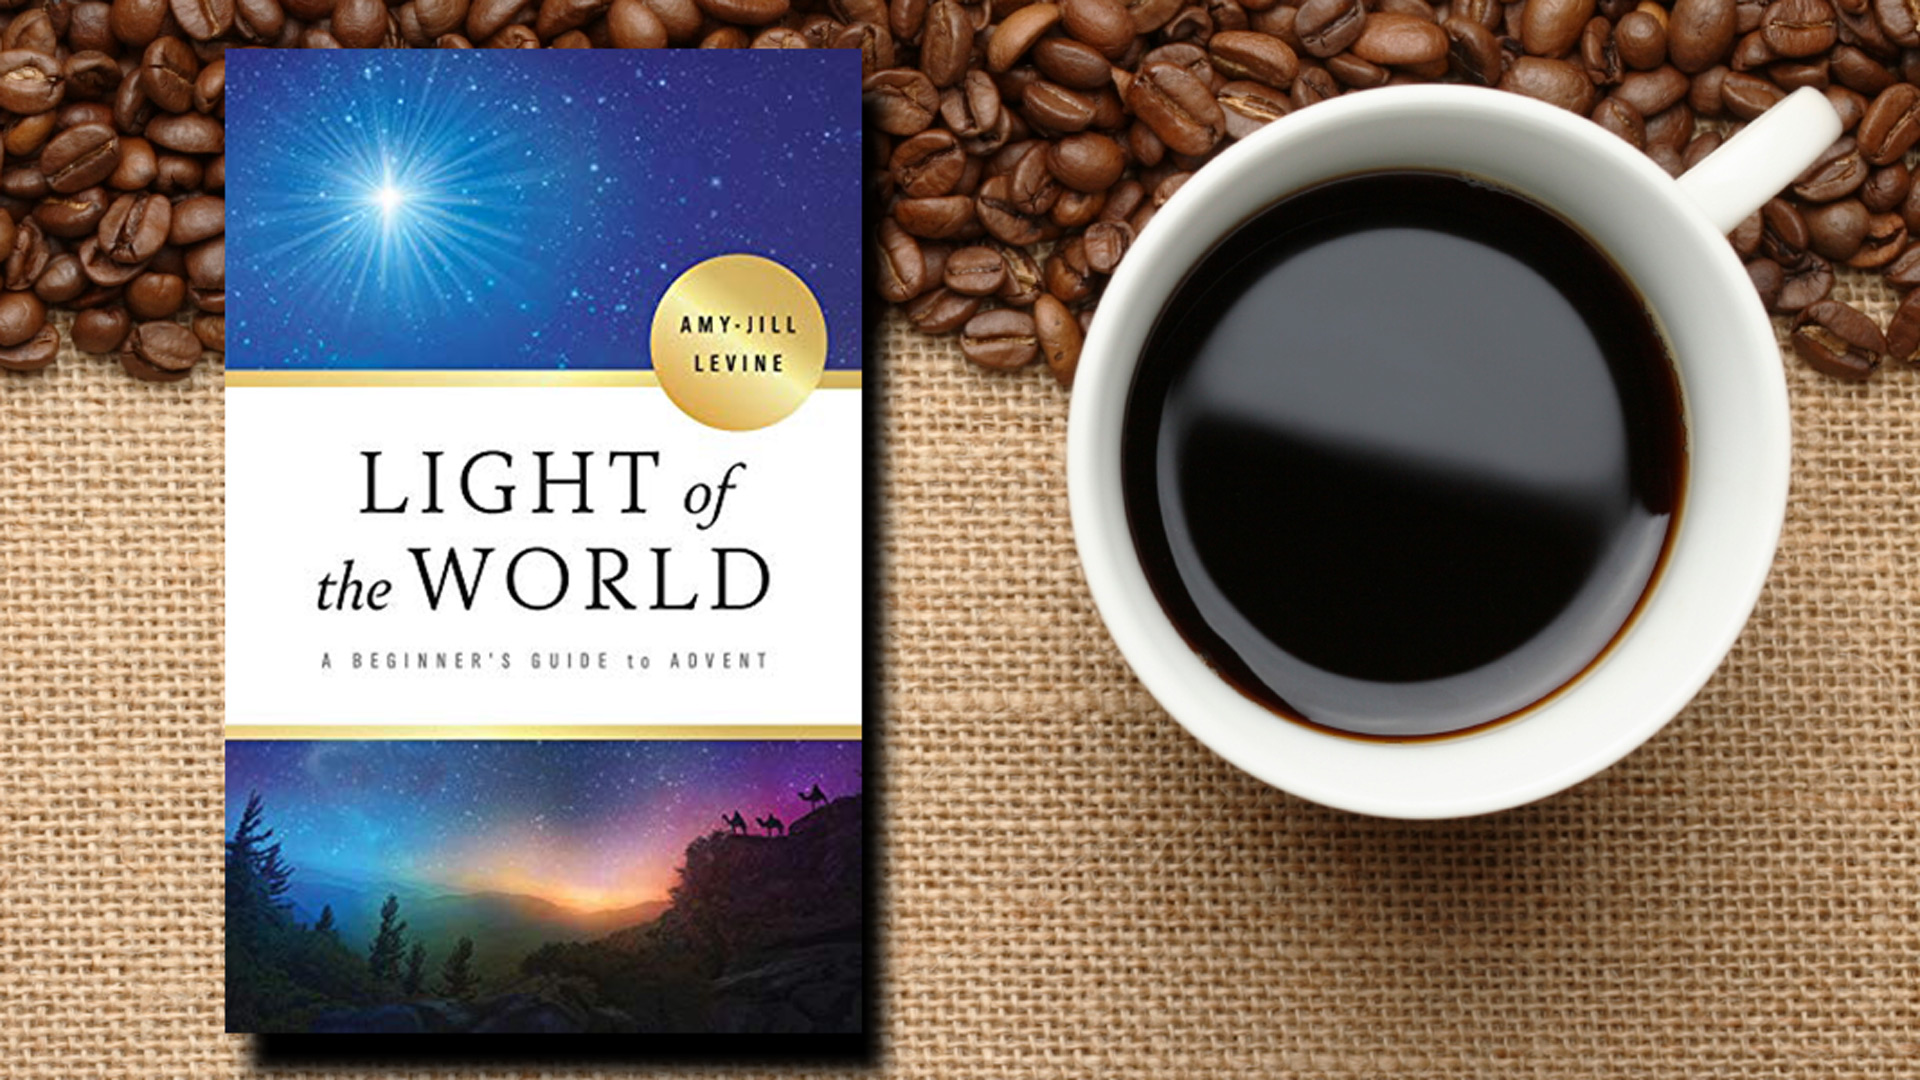 Theology, Thoughts & Coffee -- ADVENT
Book Study: Light of the World: A Beginner's Guide to Advent by Amy-Jill Levine
